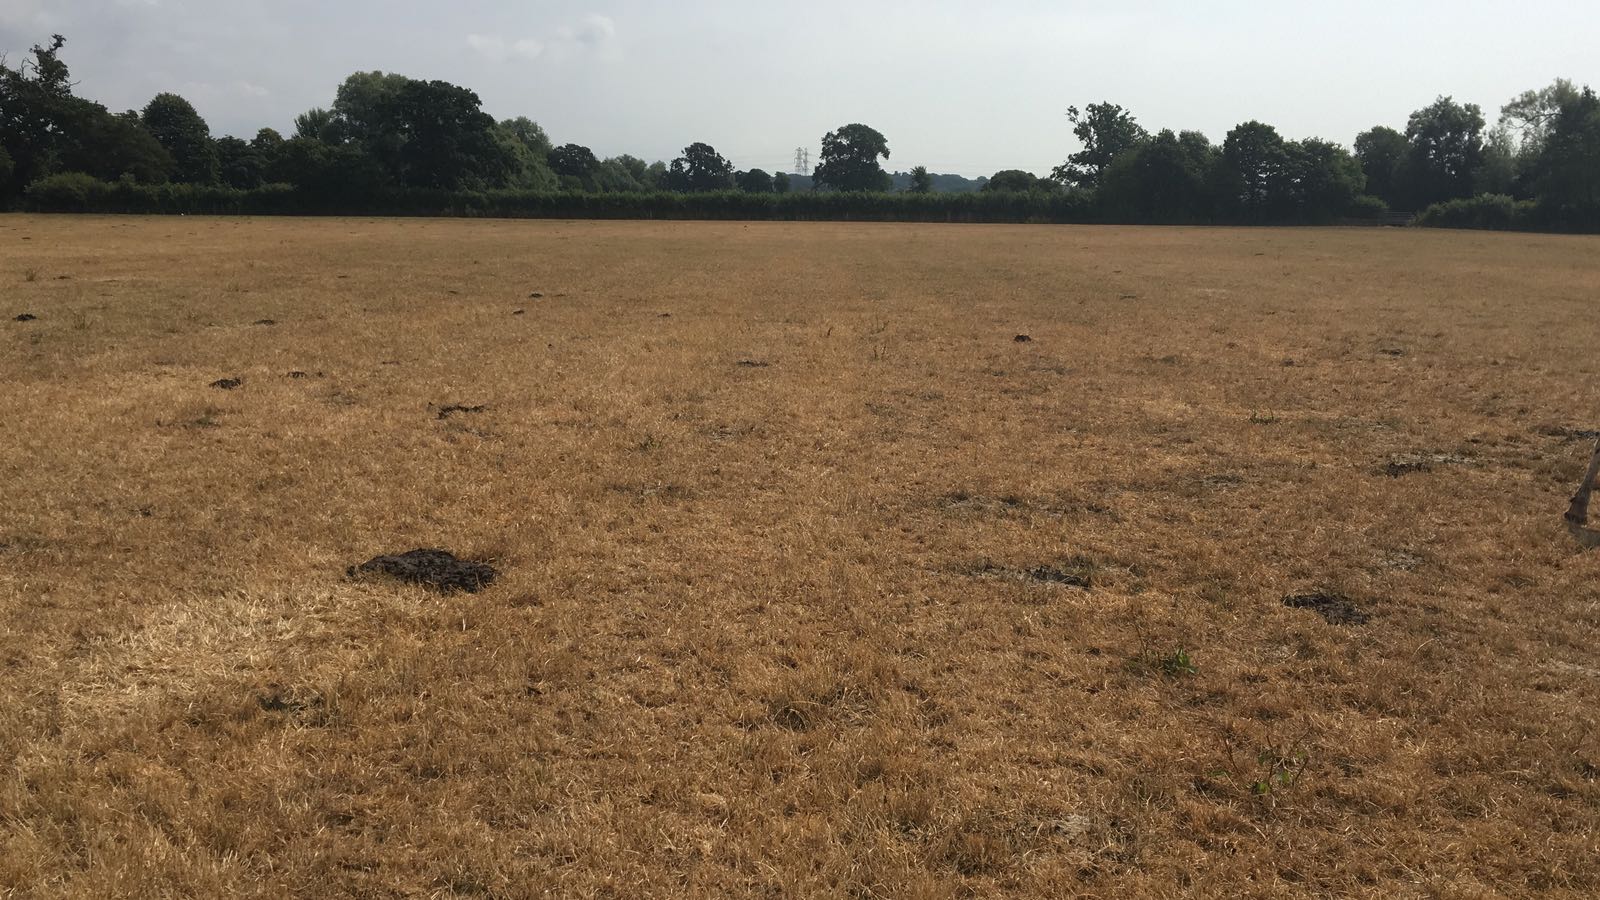 Grass field with drought